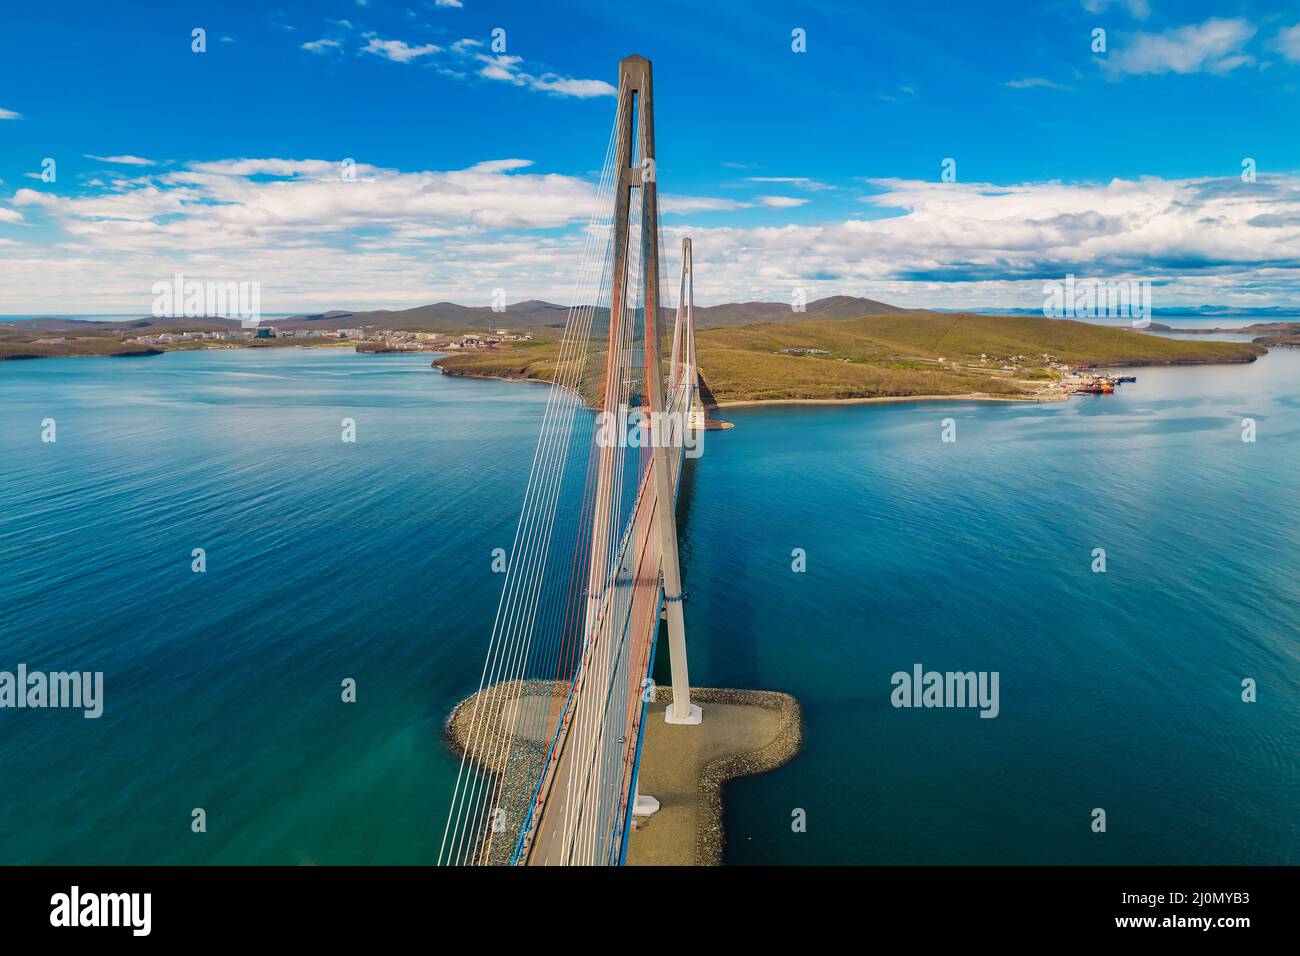 Aerial view of famous cable-stayed bridge to Russky island from Vladivostok city in Far East of Russia Stock Photo